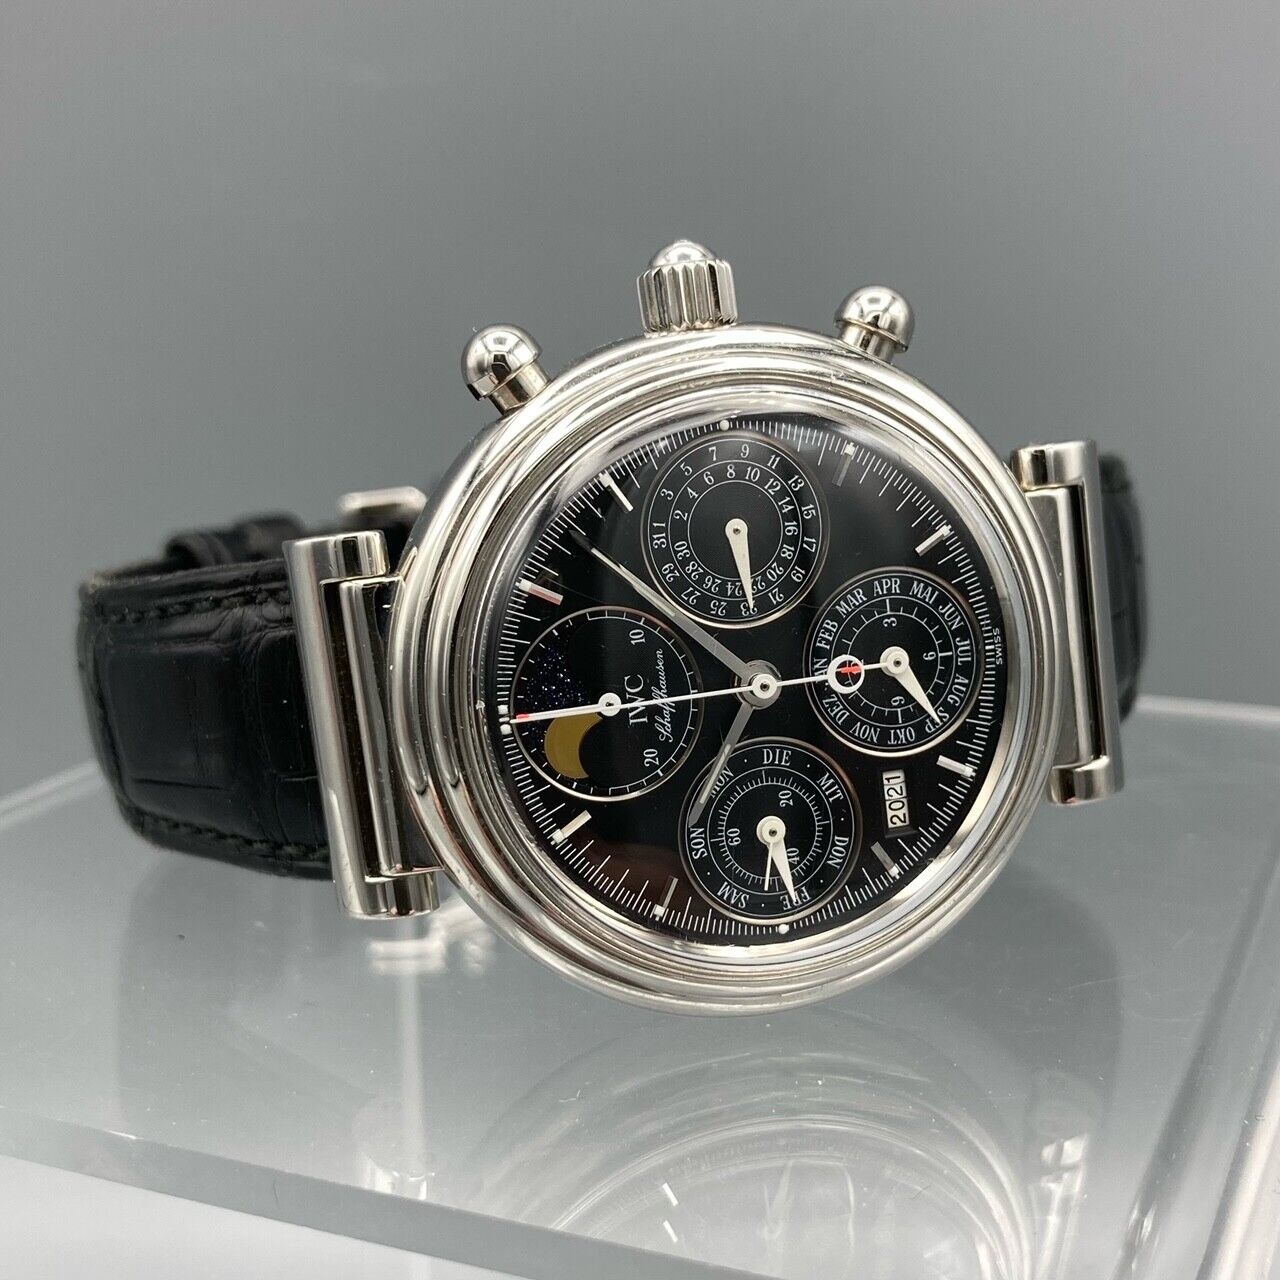 IWC Schaffhausen Automatic Perpetual Calendar Moon Phase IW3750 Stainless Steel